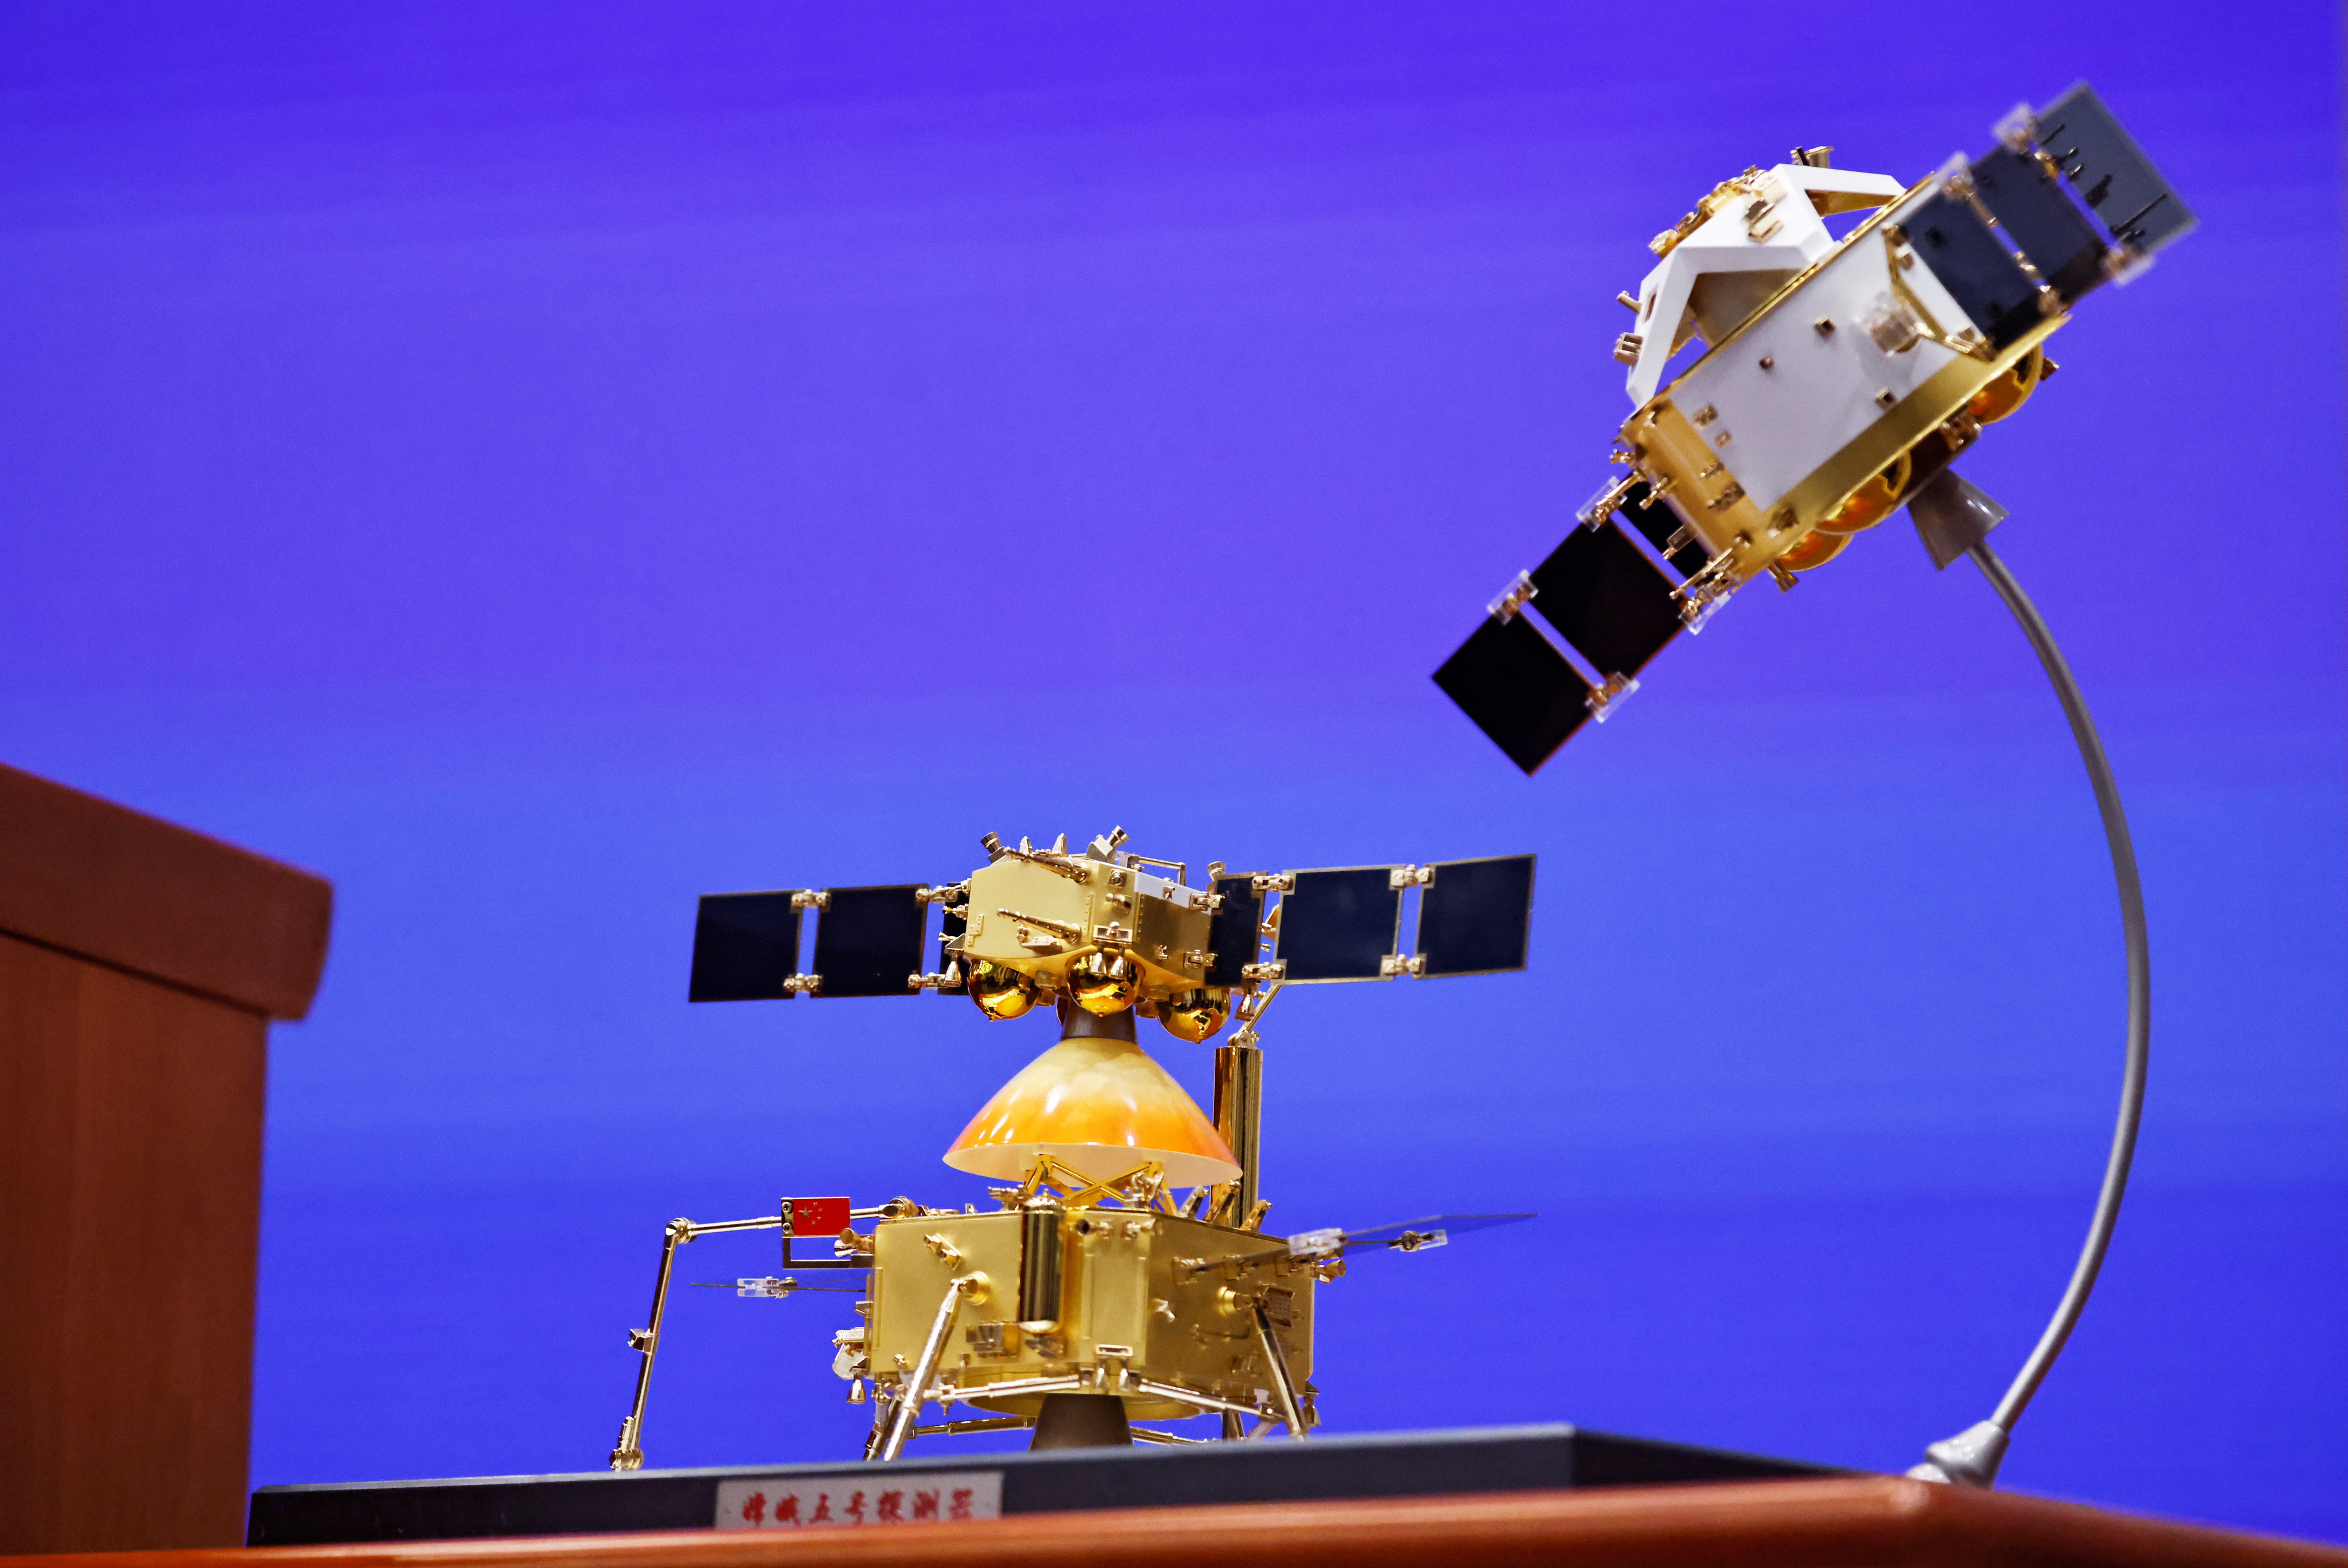 News conference on China's Chang'e-5 moon probe in Beijing